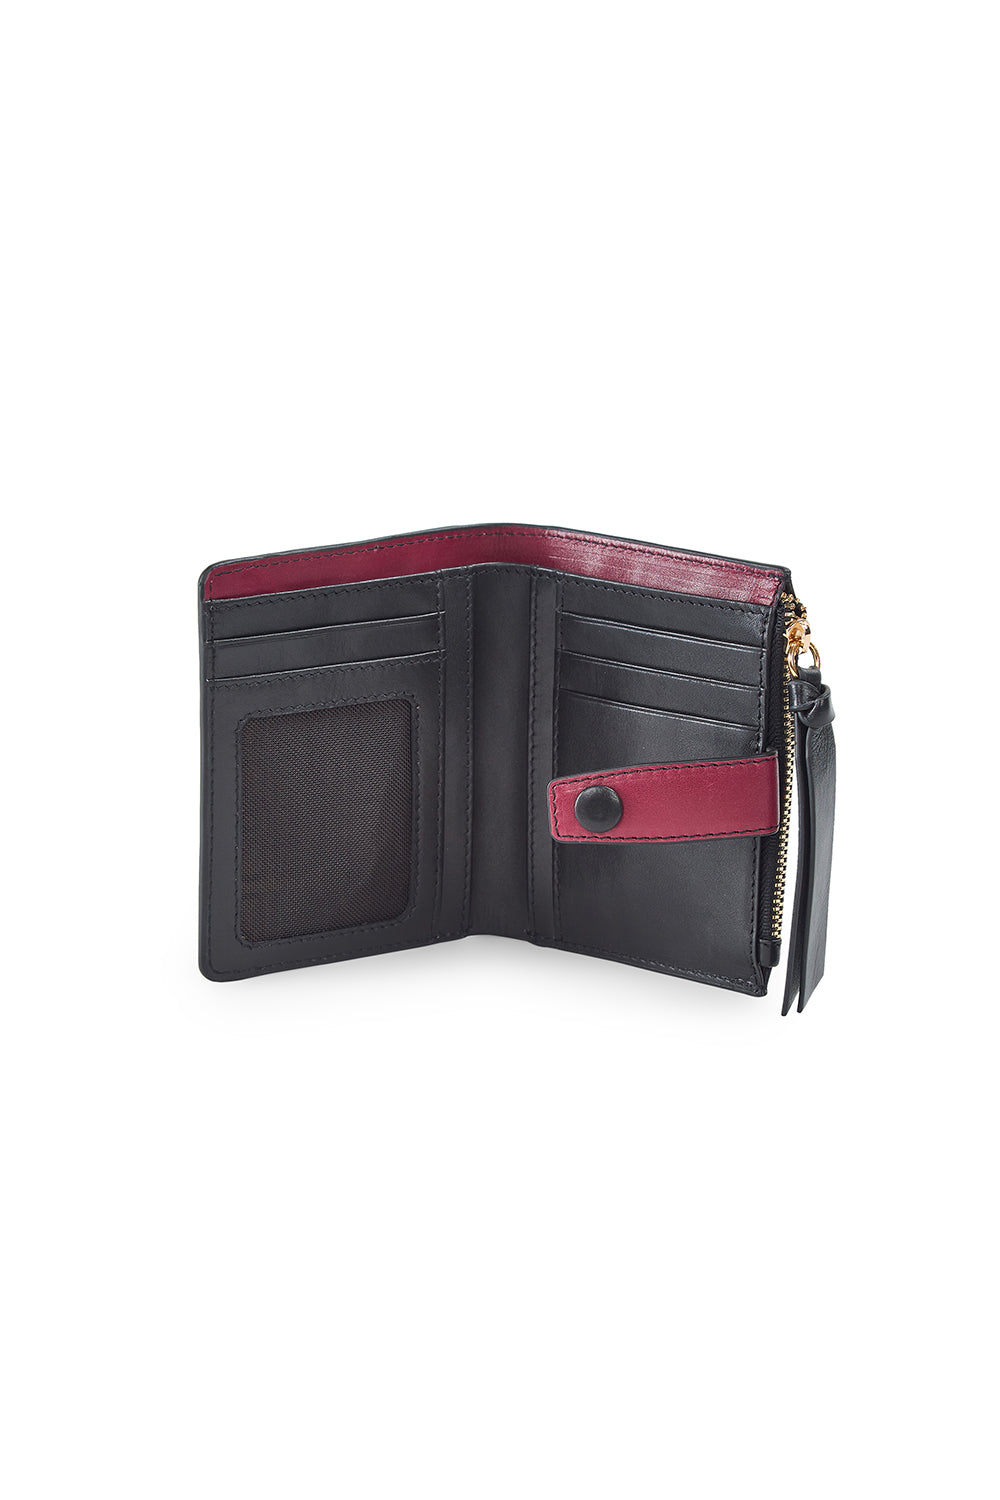 Paige Small Wallet